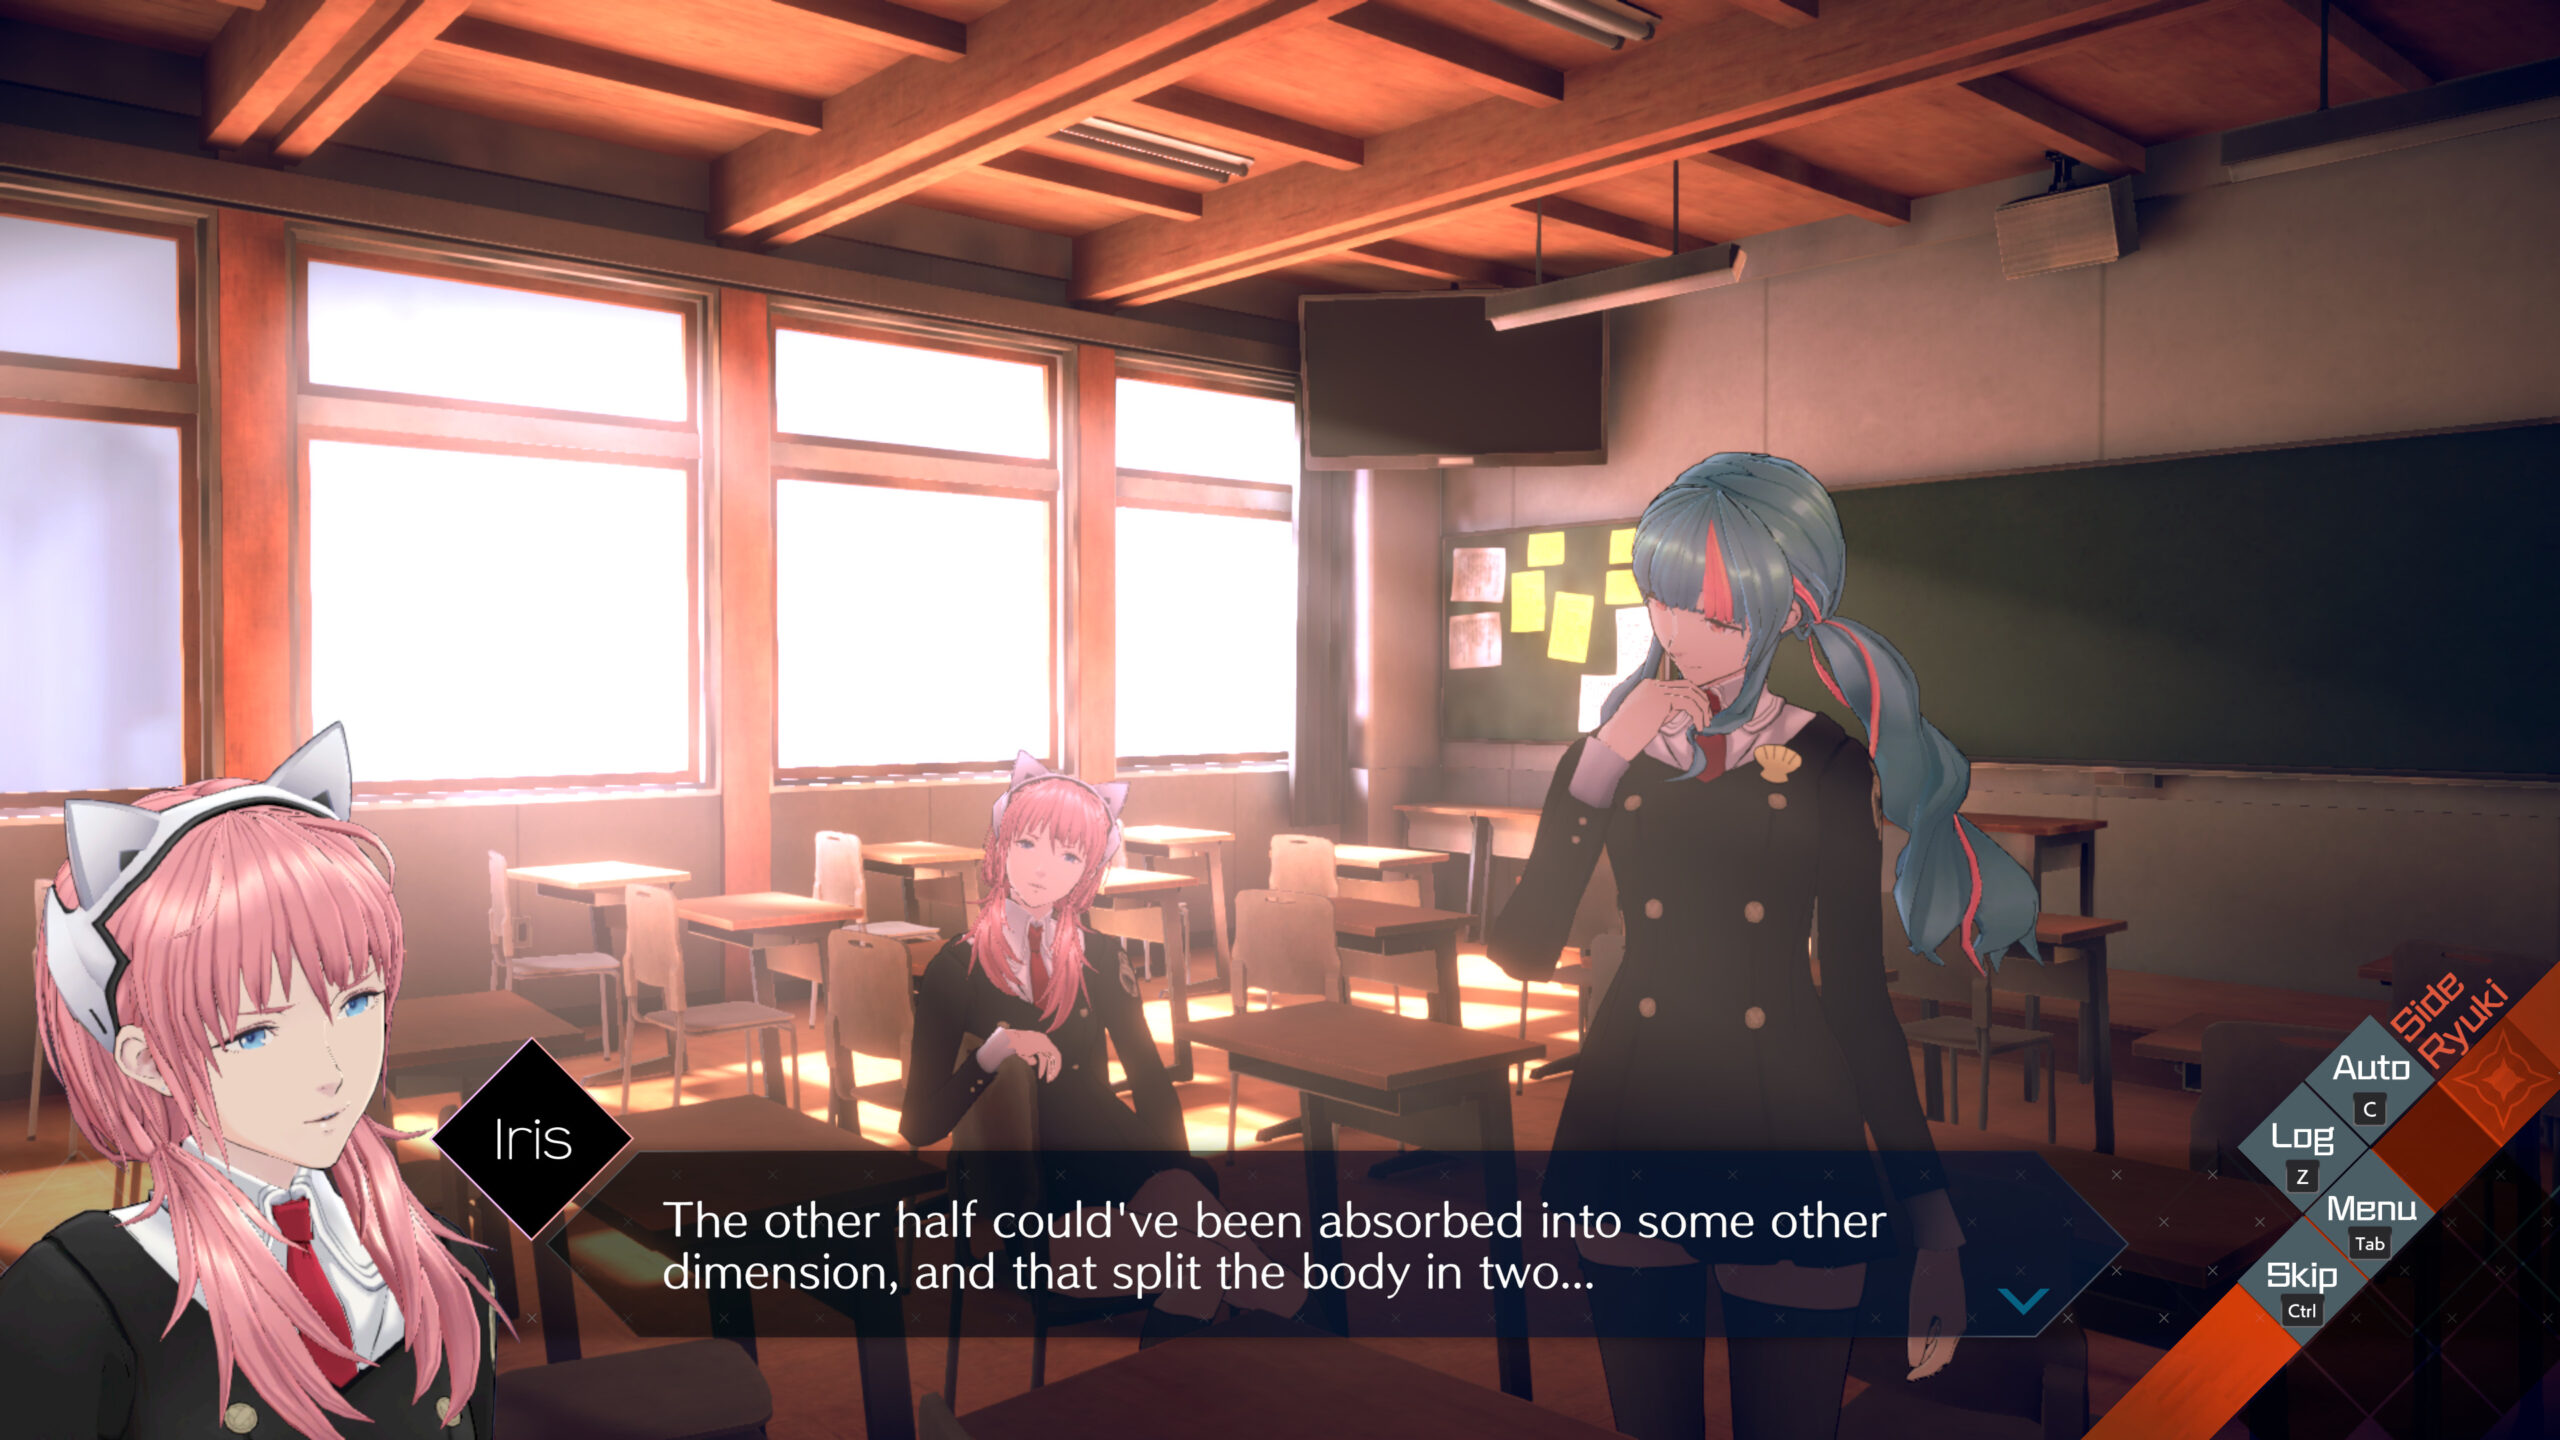 Screenshot of Iris saying "the other half could've been absorbed into some other dimension, and then split the body in two